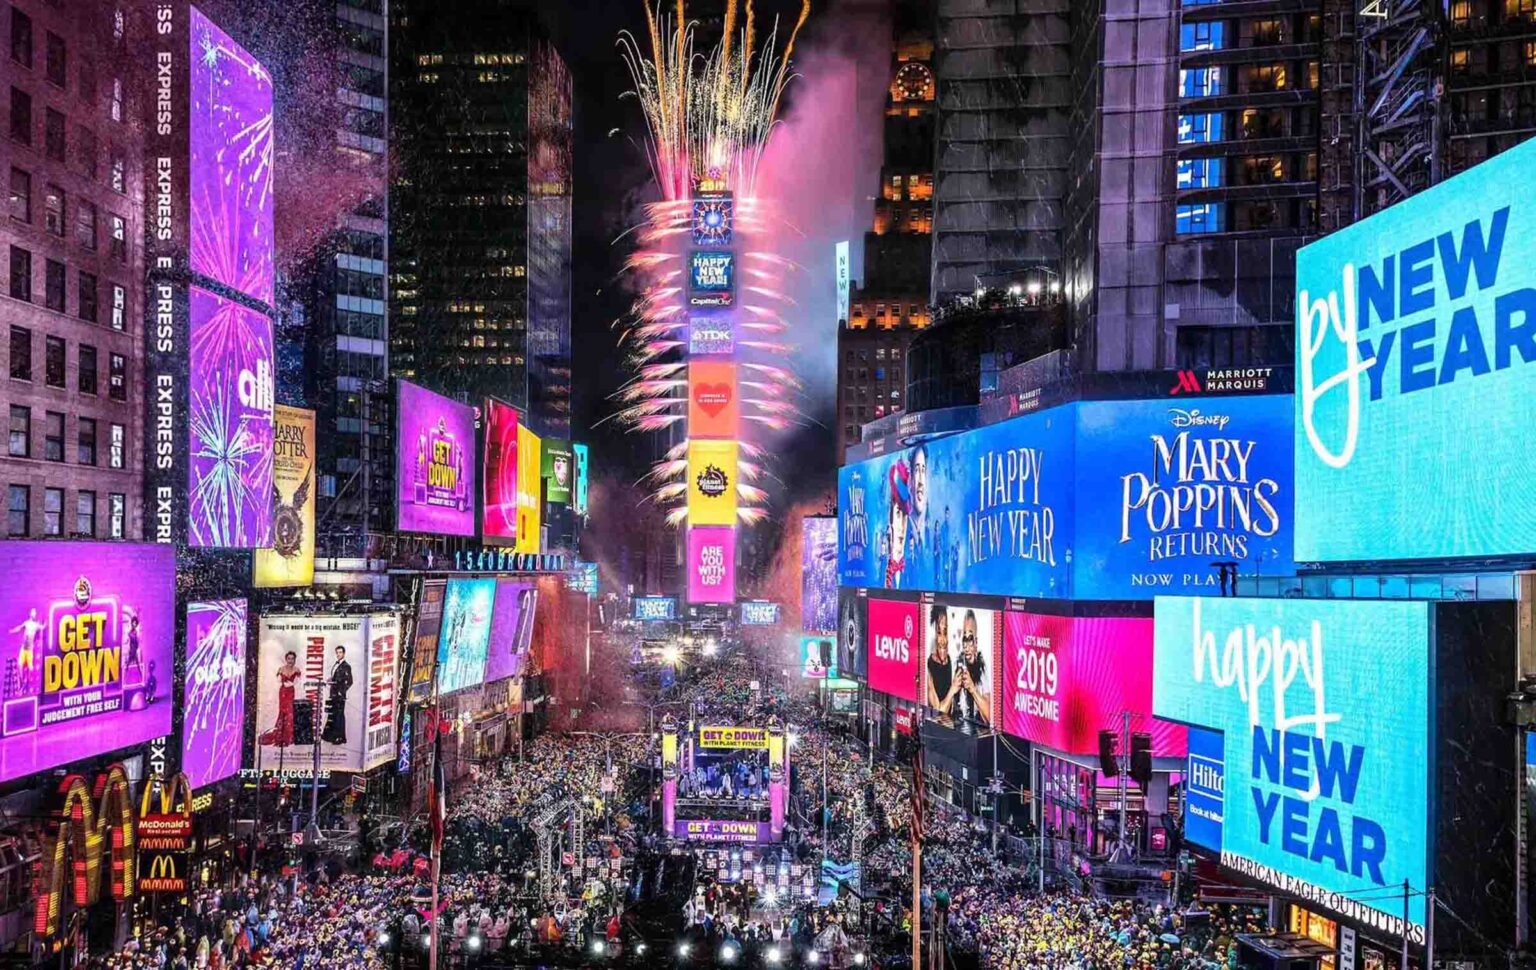 Looking forward to celebrating New Year’s Eve 2020 in grand style? Well, forget it. The coronavirus pandemic shut down beloved Times Square celebrations.